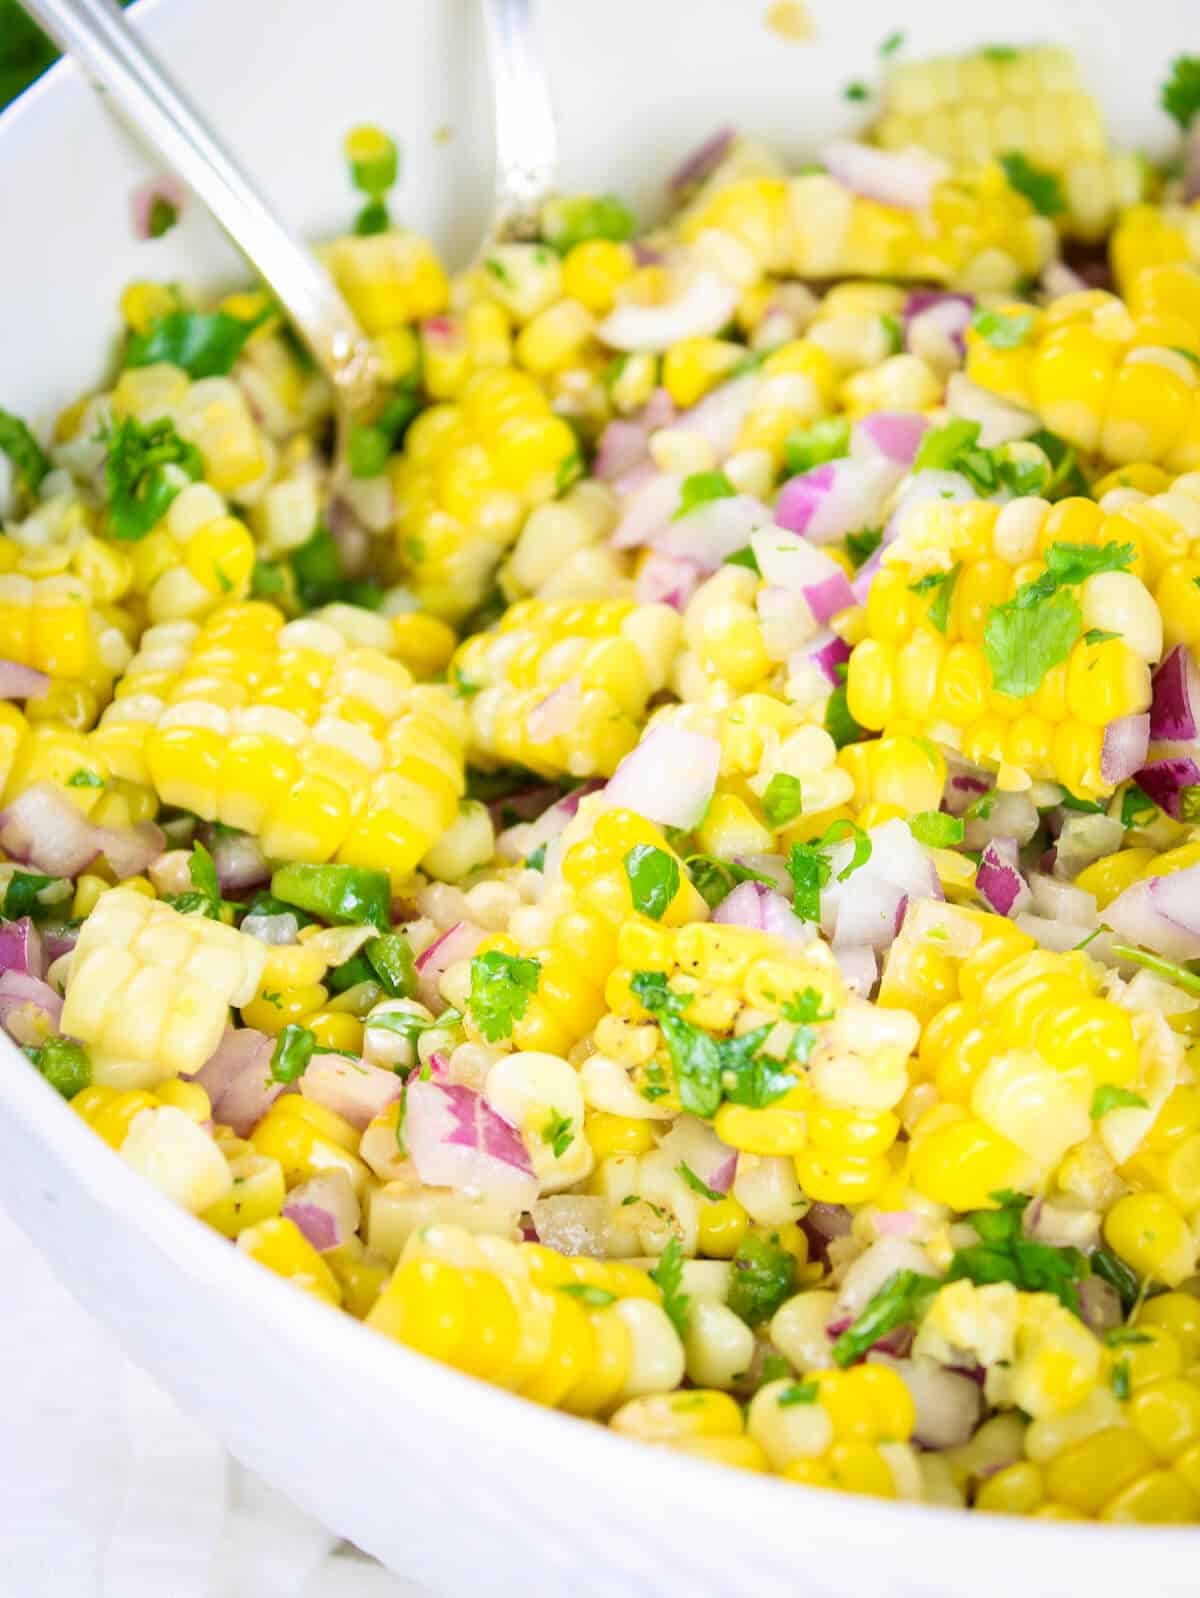 Close-up photo of the Corn Salad mixed and ready to eat.